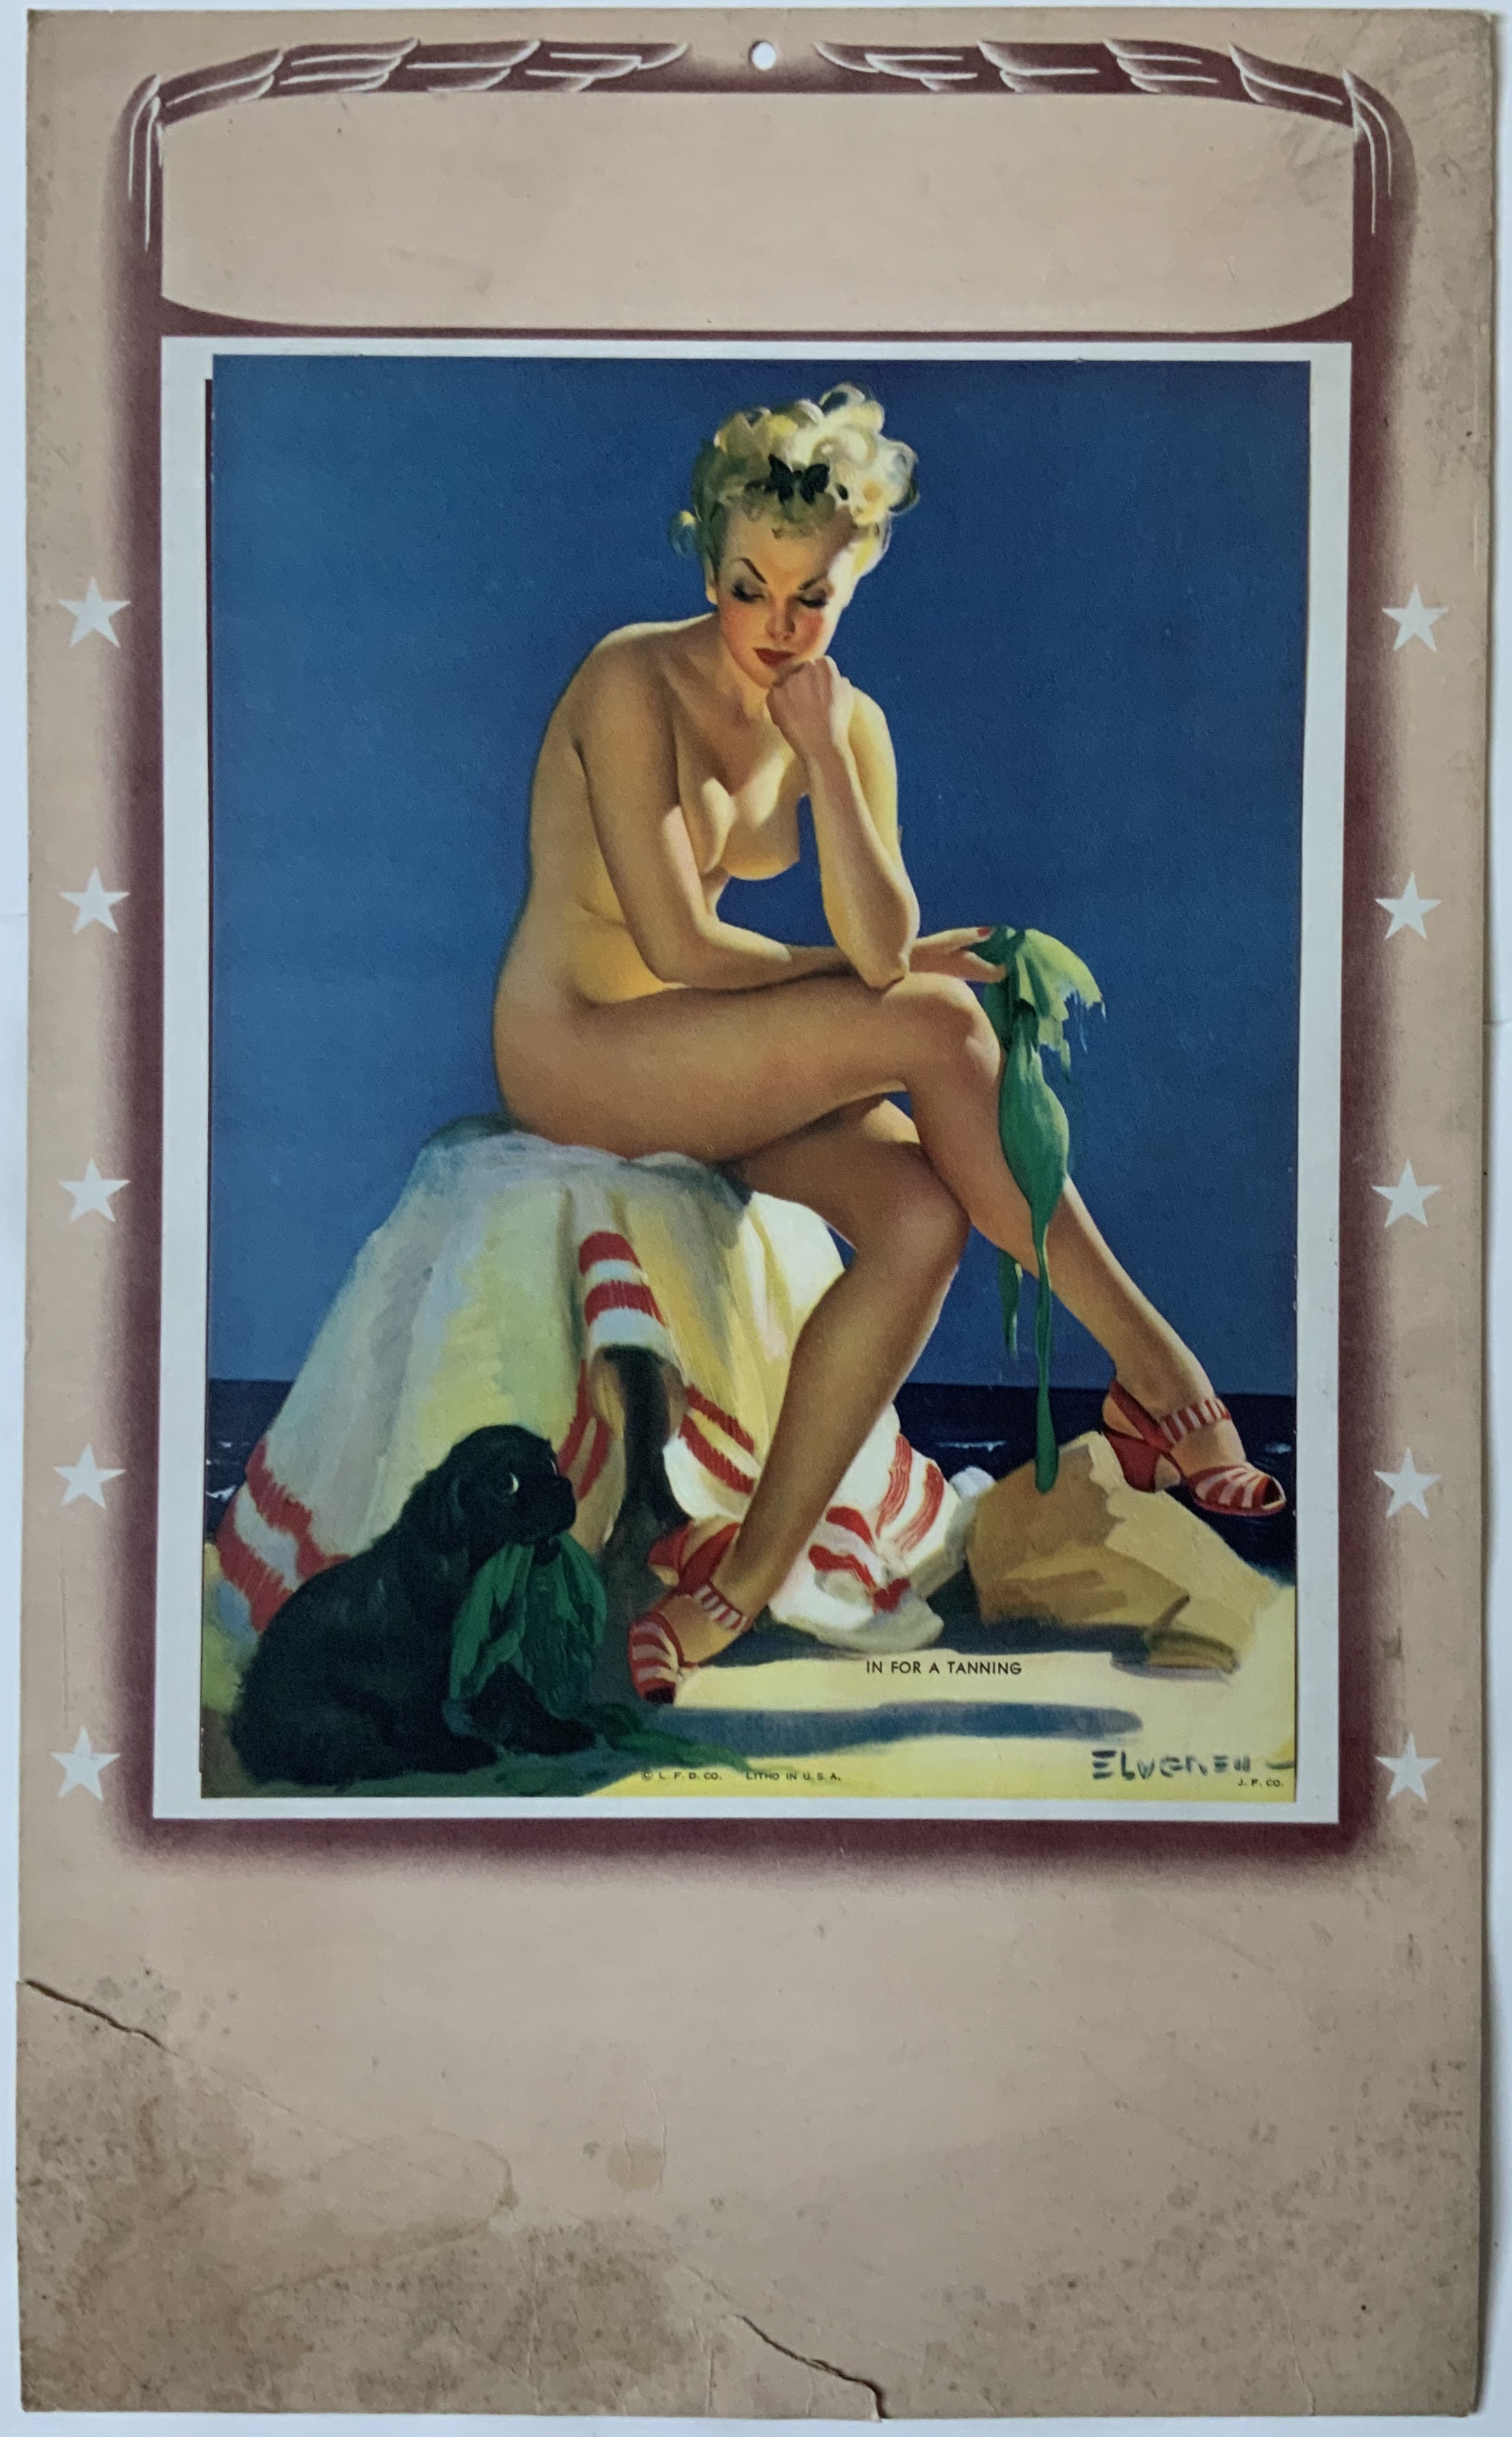 J534	PIN UP CALENDAR CA. 1950 "IN FOR A TANNING"